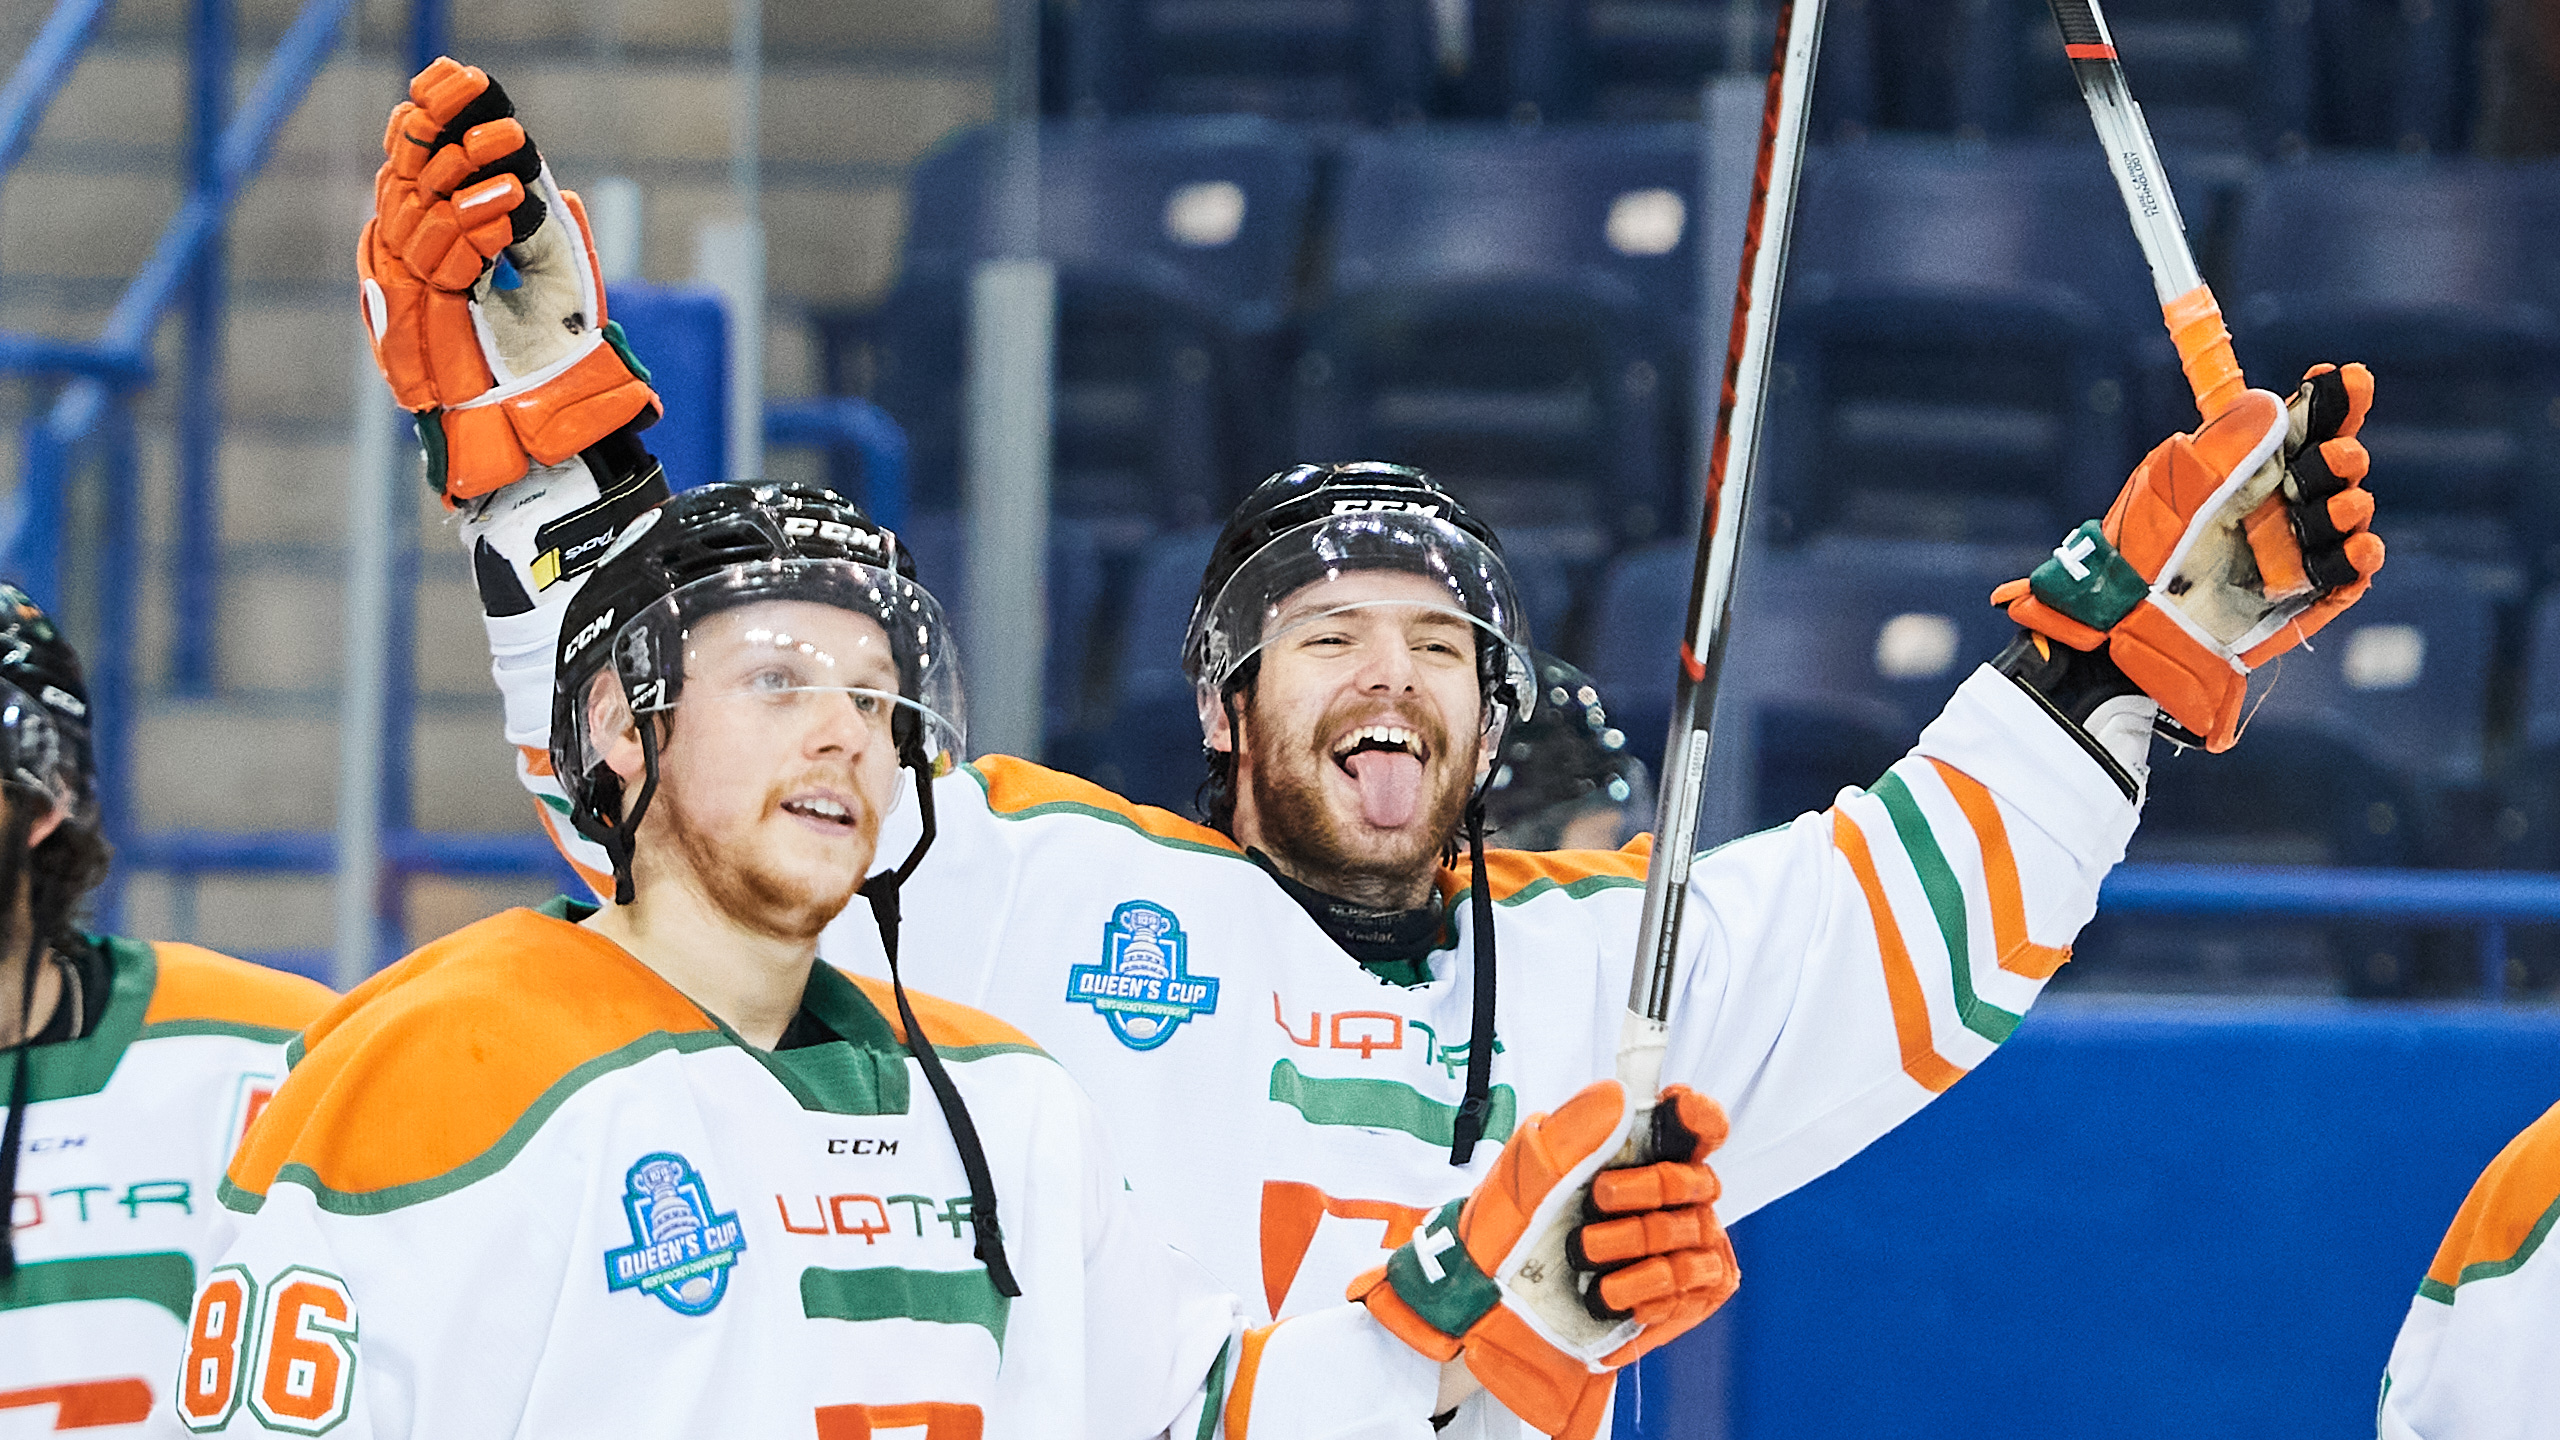 UQTR hockey players smile and celebrate